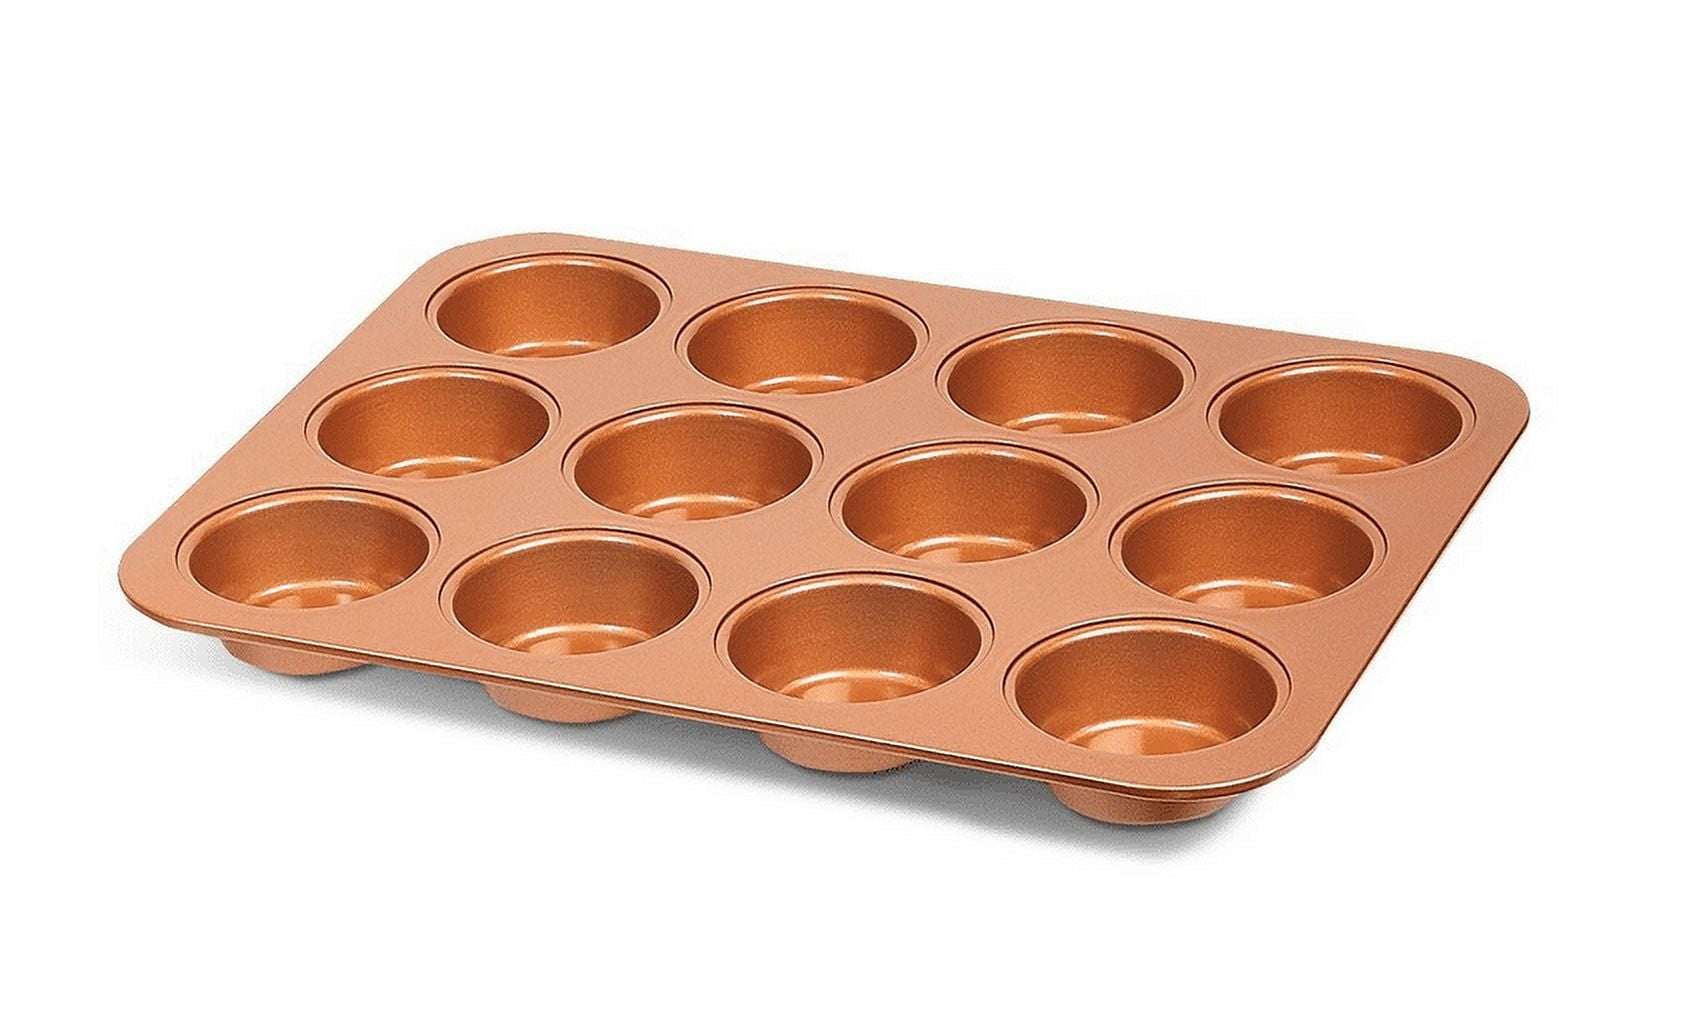 Copper Ceramic Nonstick Solid Aluminum Muffin Pan for 12 Muffins Cupcakes Popovers Yorkshire Puddings